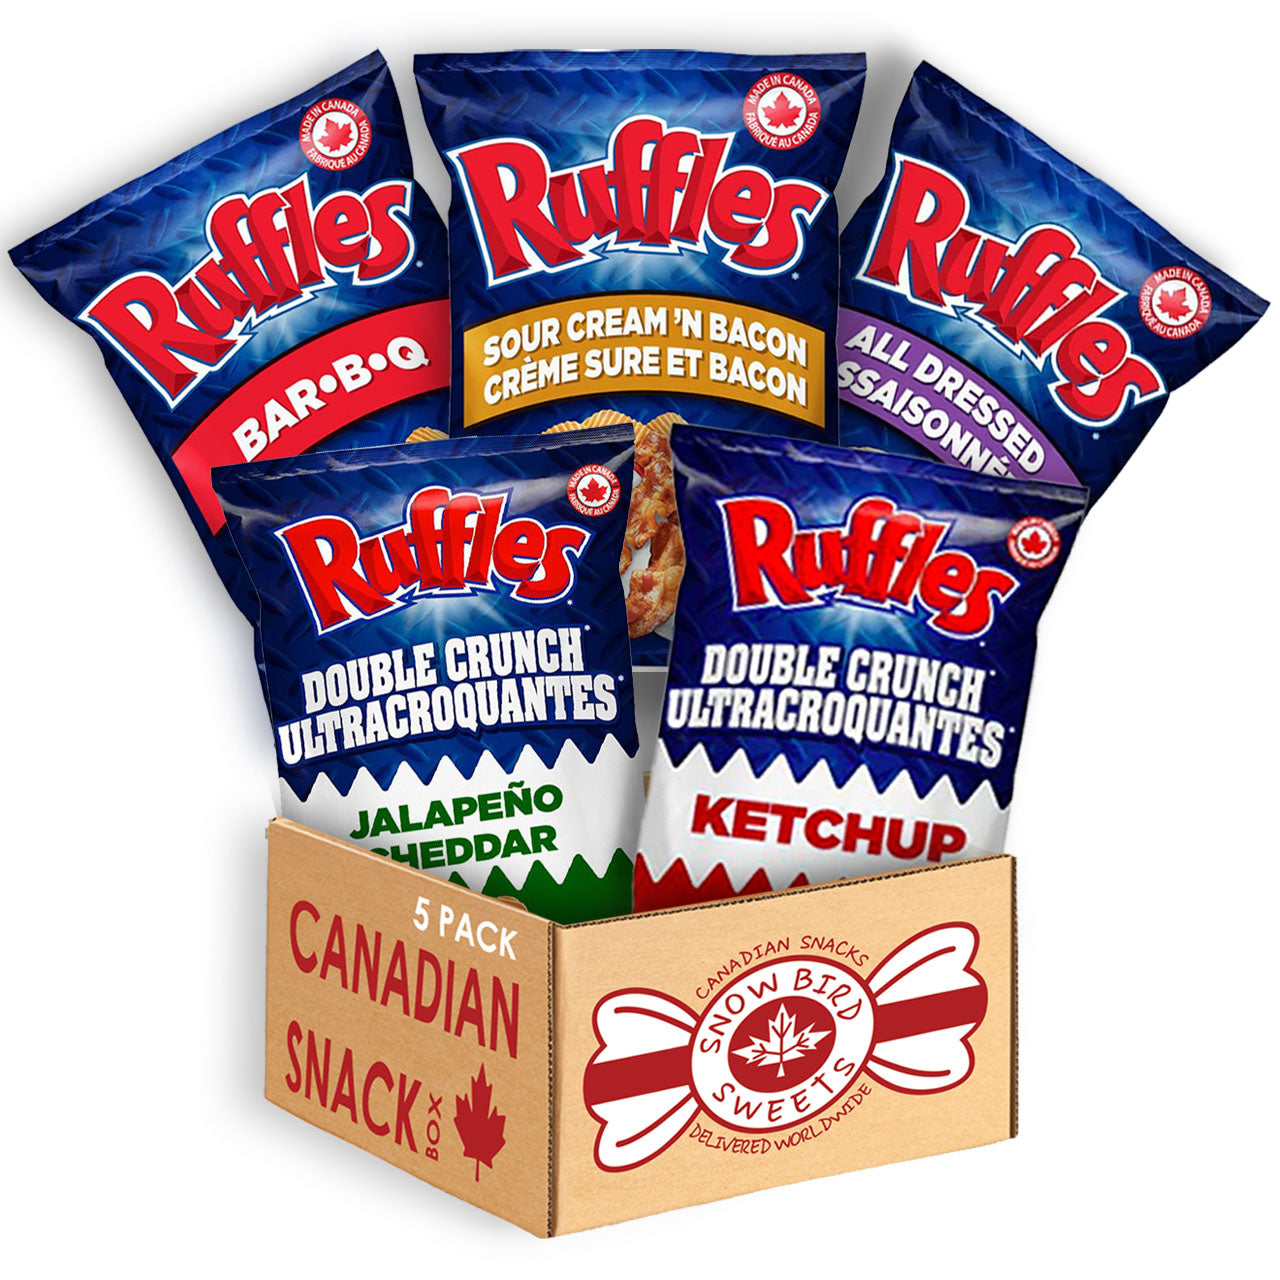 Ruffles Variety Bundle 1 BBQ, 1 Sour Cream, 1 All dressed, 1 Jalapeno, 1 Ketchup